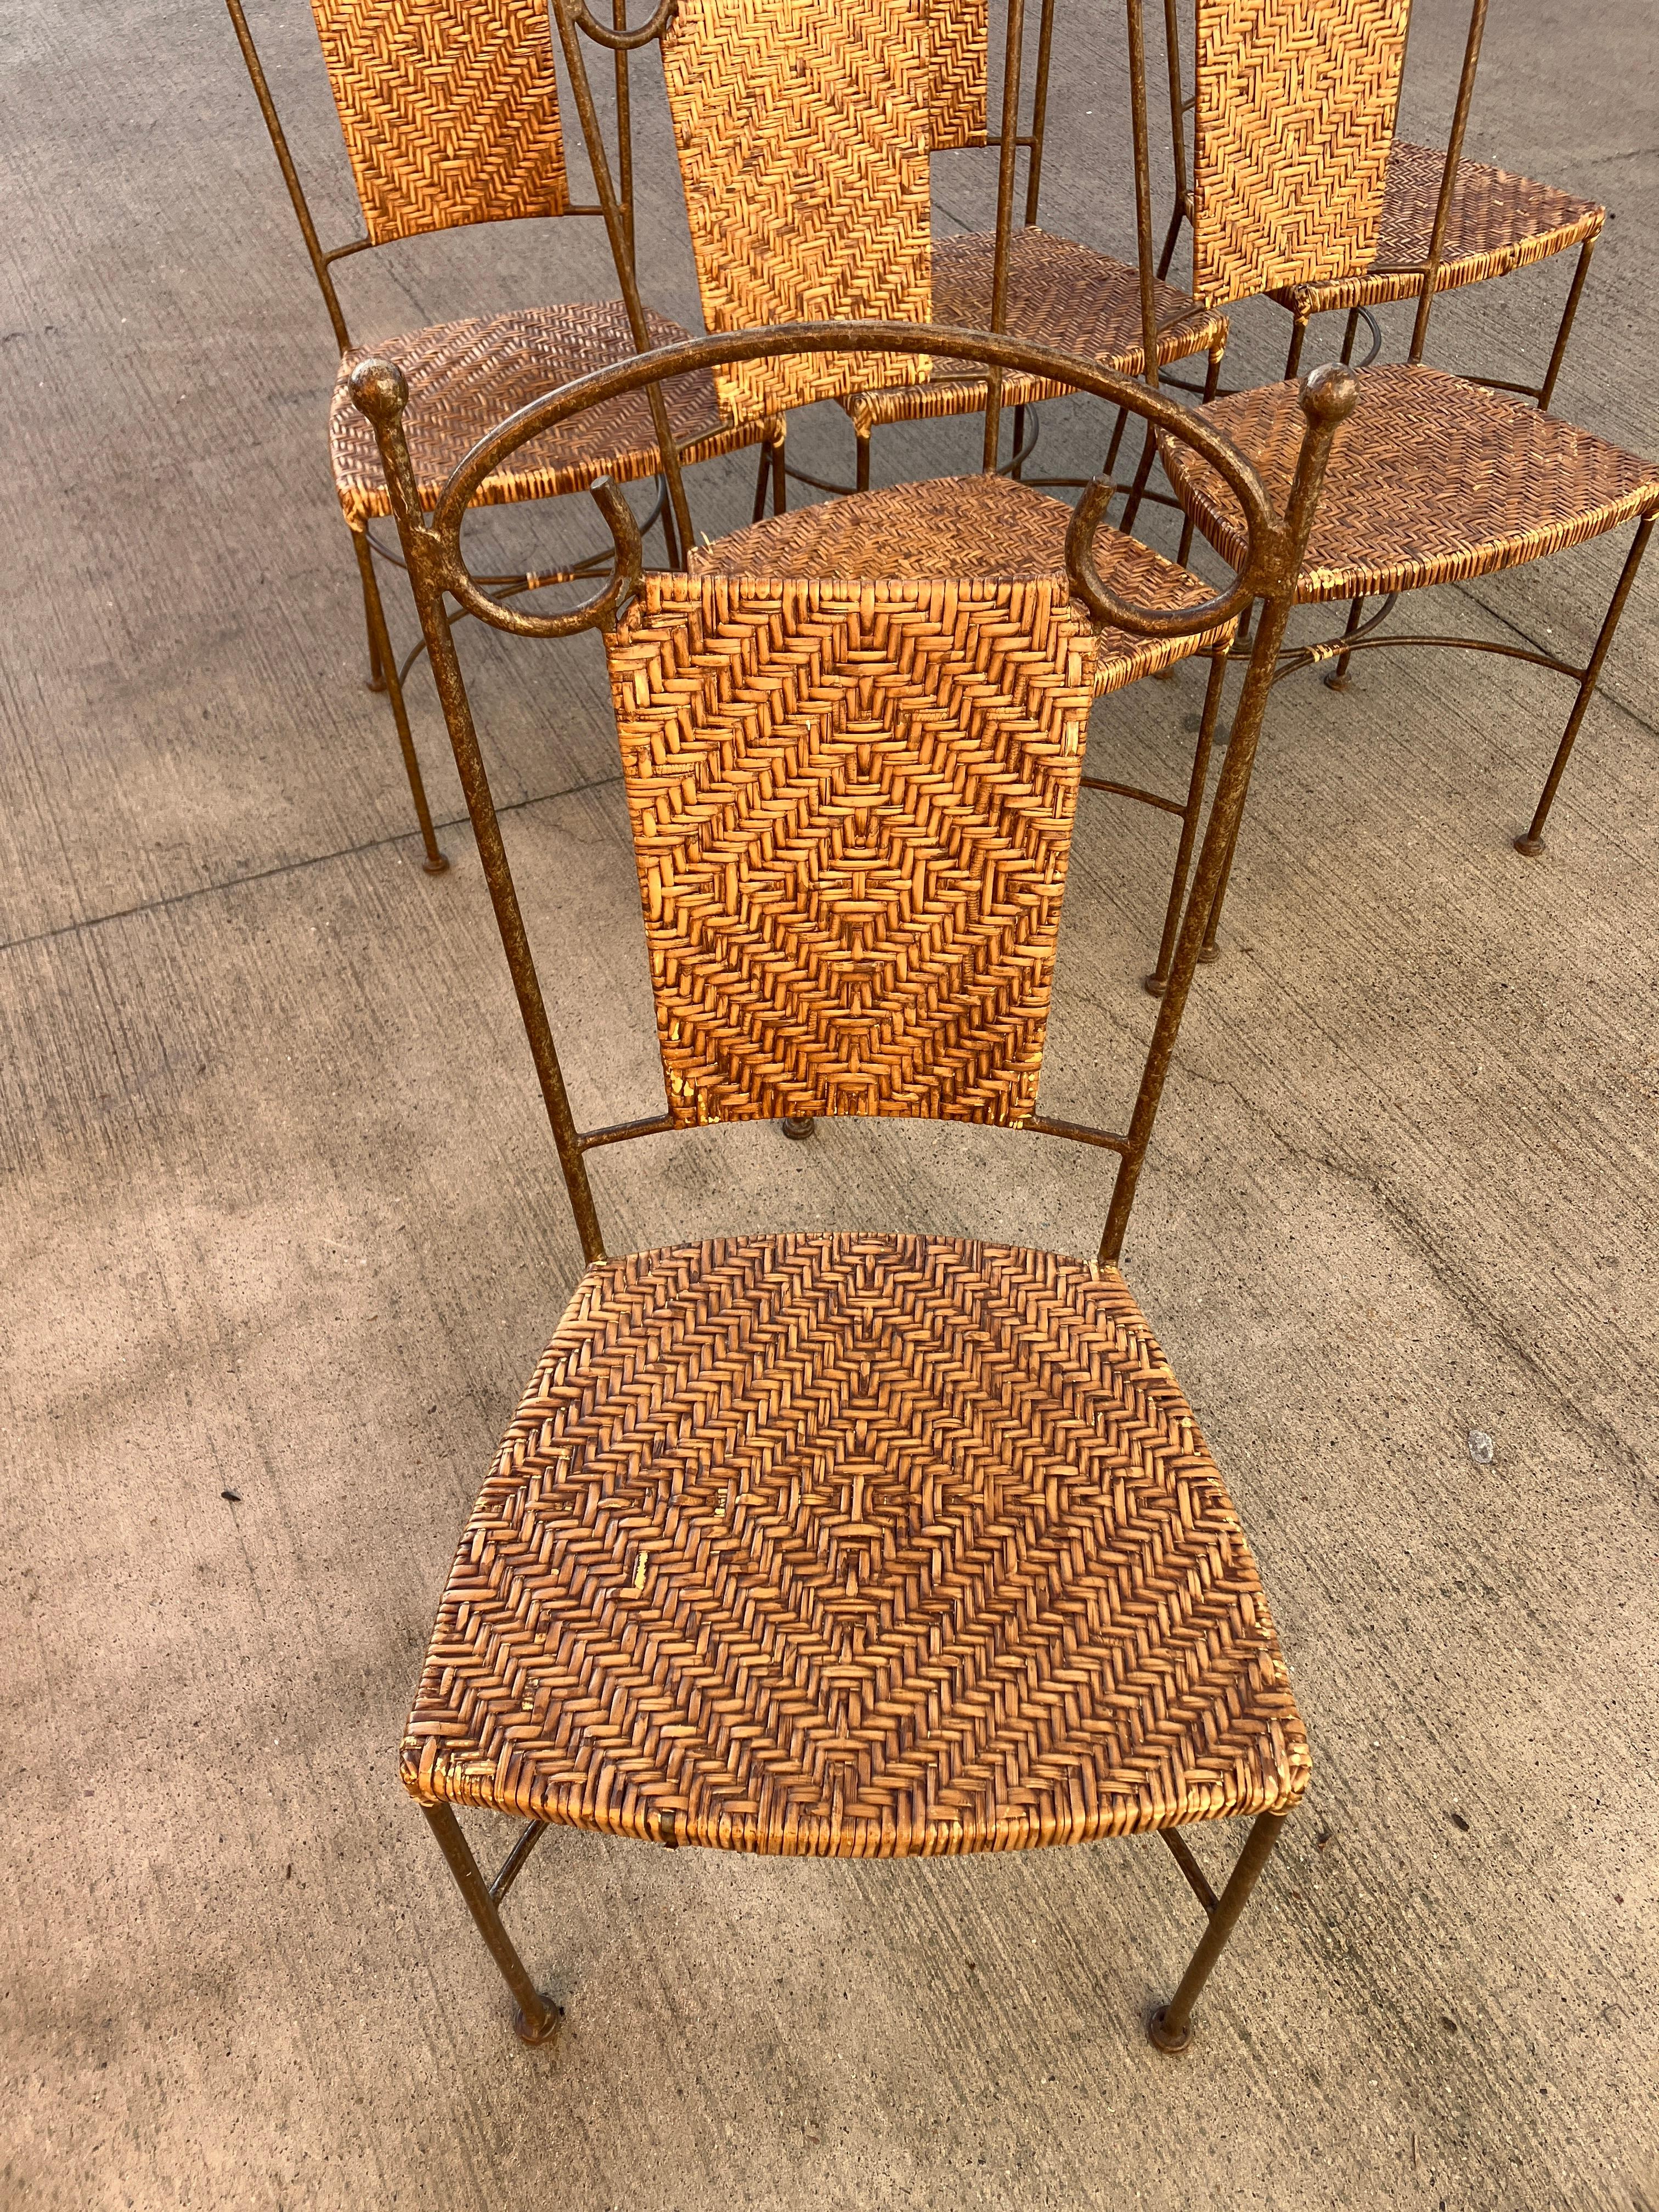 Late 20th Century Vintage wrought Iron Dining Chairs with Wicker Seating x 6